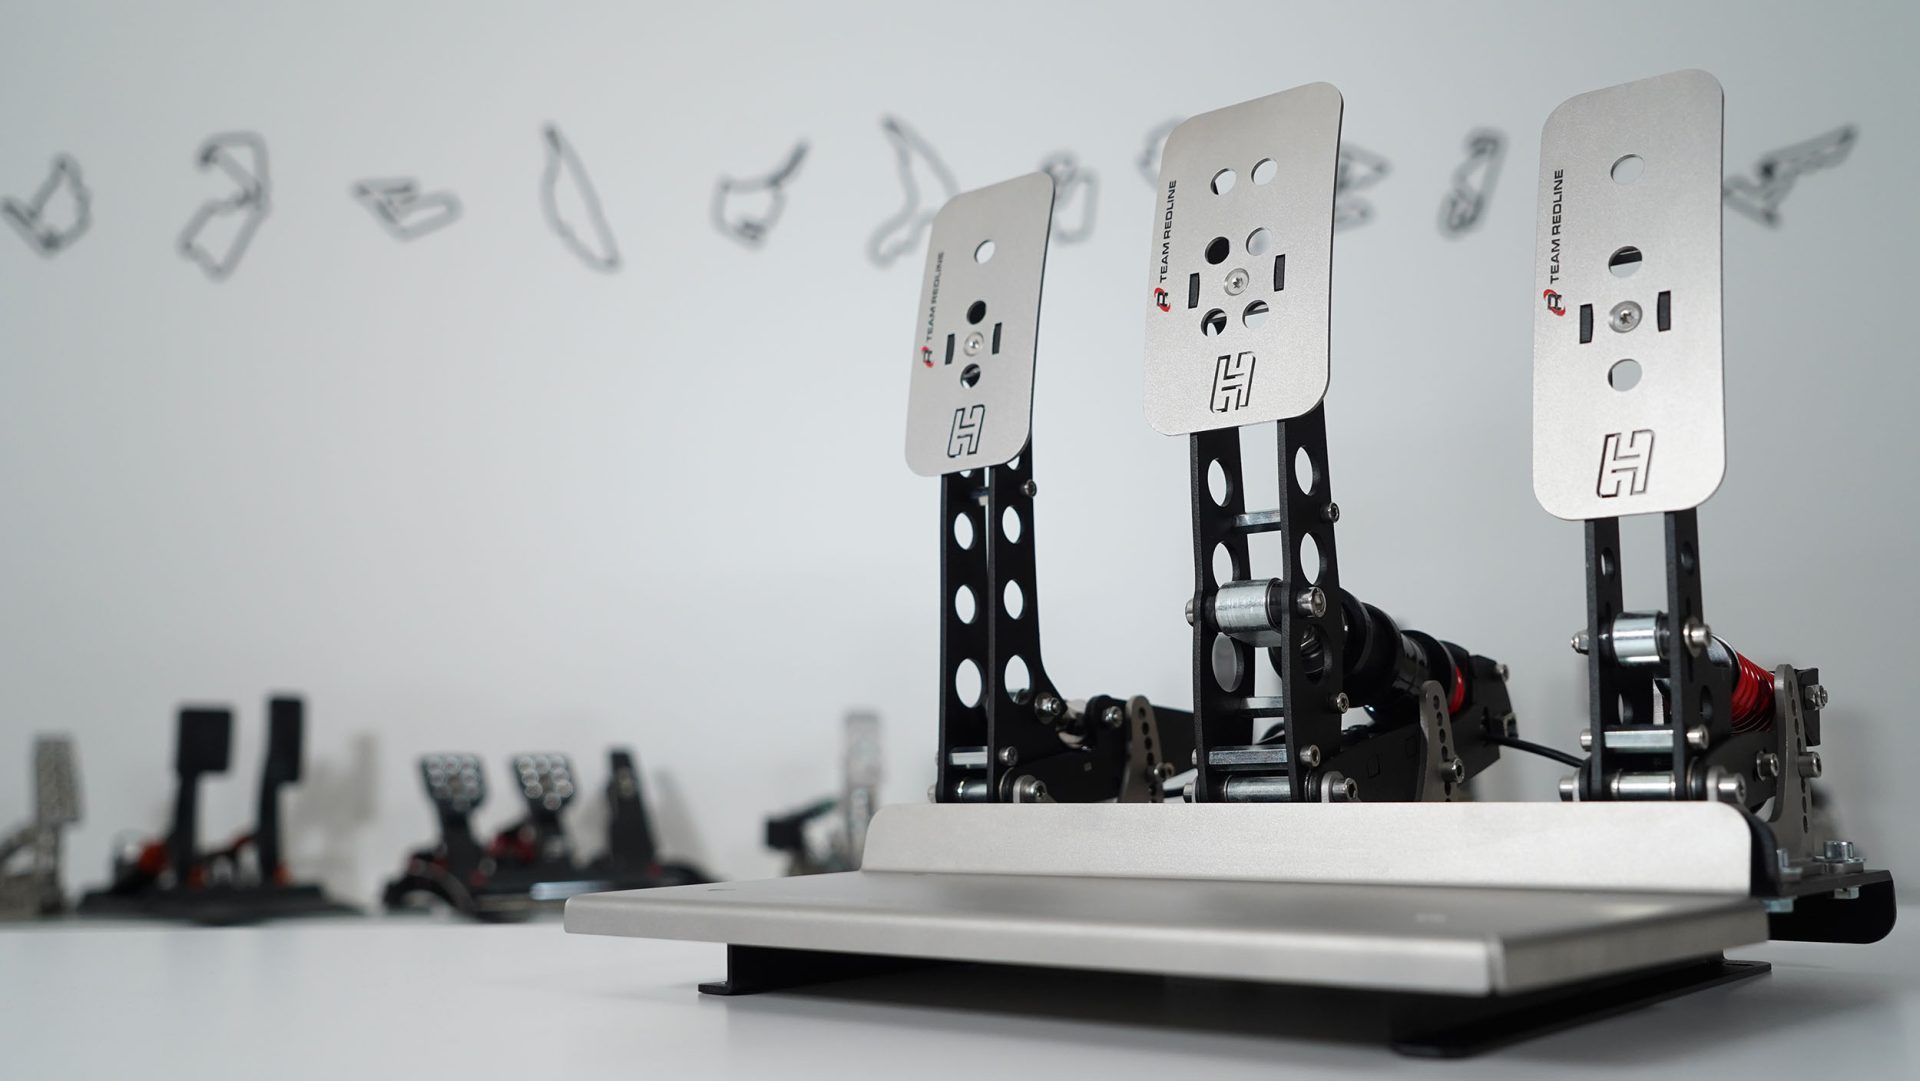 REVIEW - Heusinkveld Sprint Sim Racing Pedals - Boosted Media